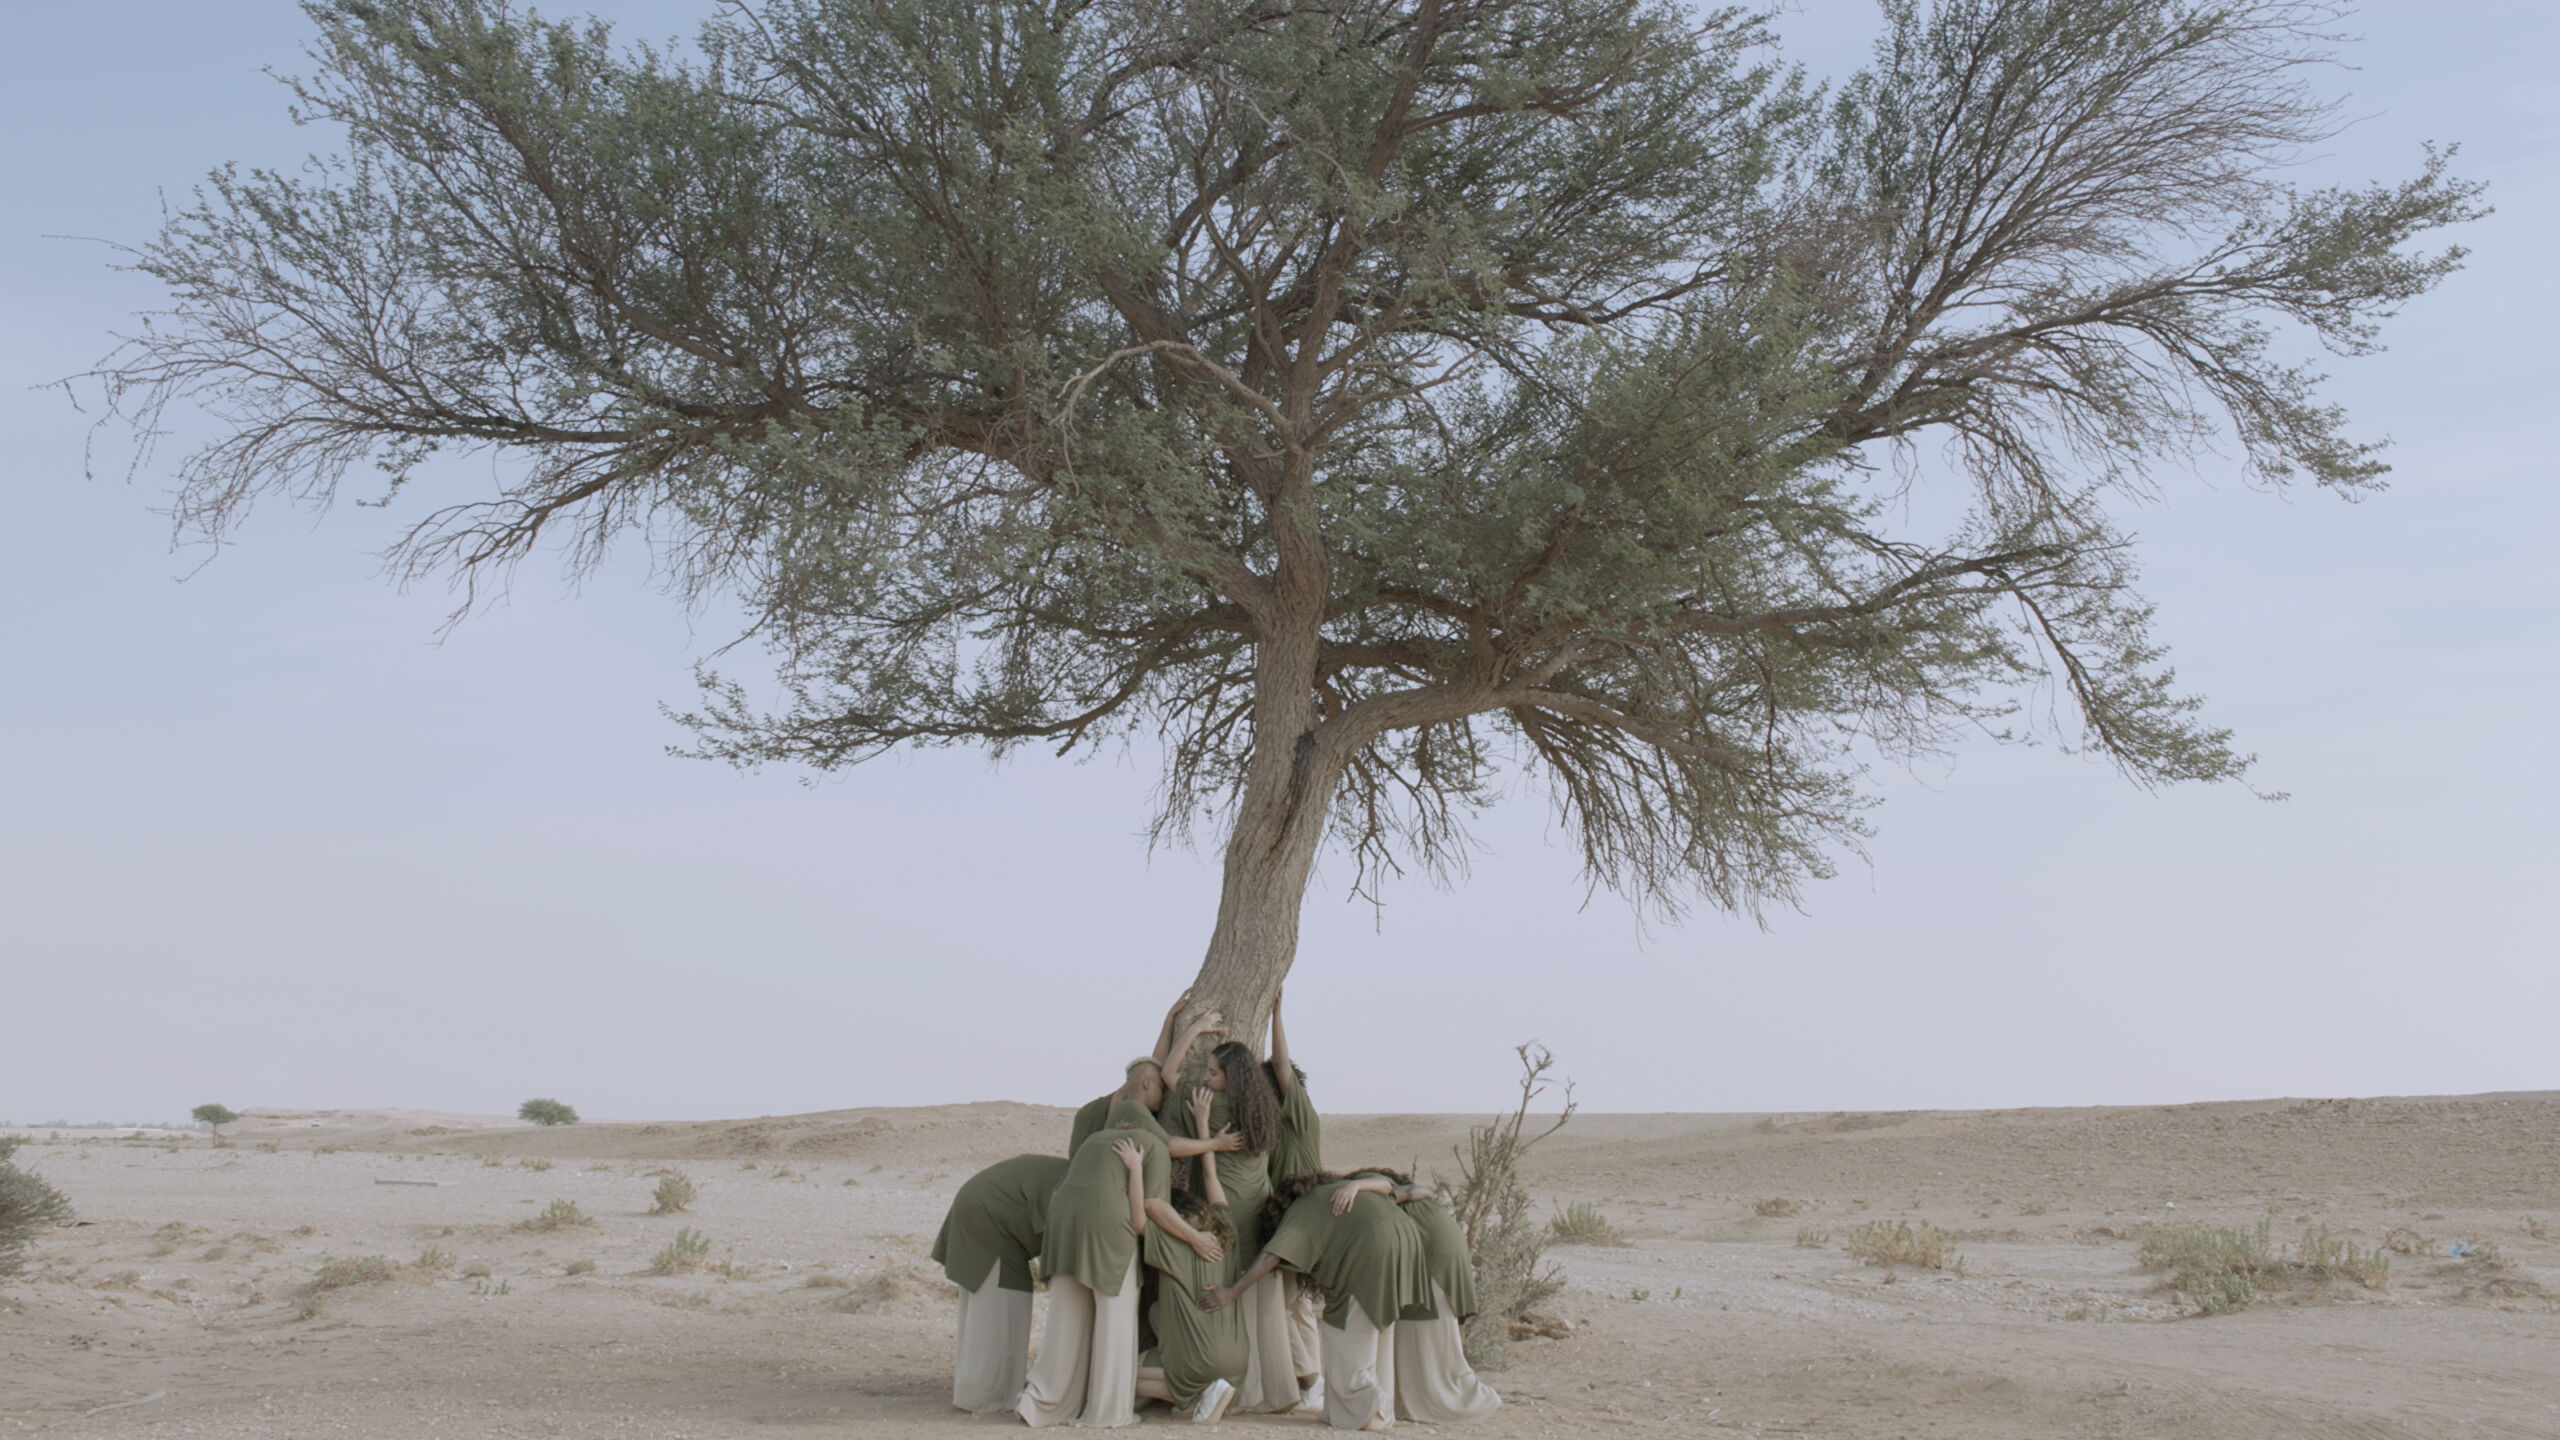 Group of performers moulded around a tree in the desert